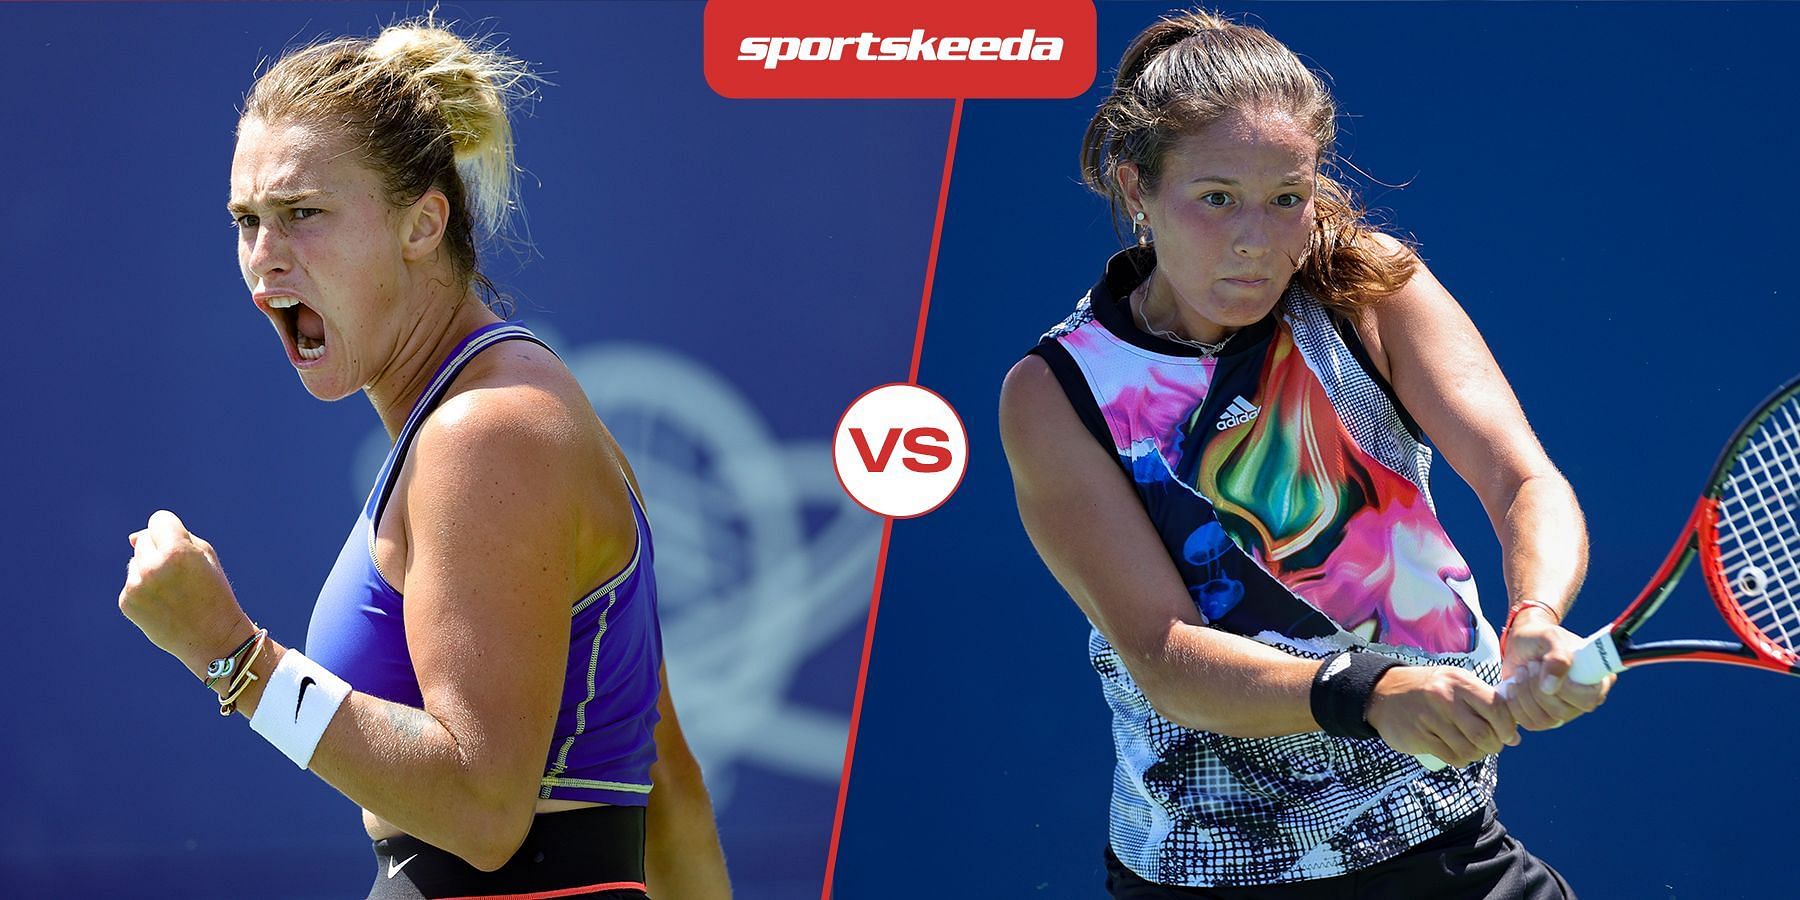 Aryna Sabalenka will square off against Daria Kasatkina in the quarterfinals of the Silicon Valley Classic